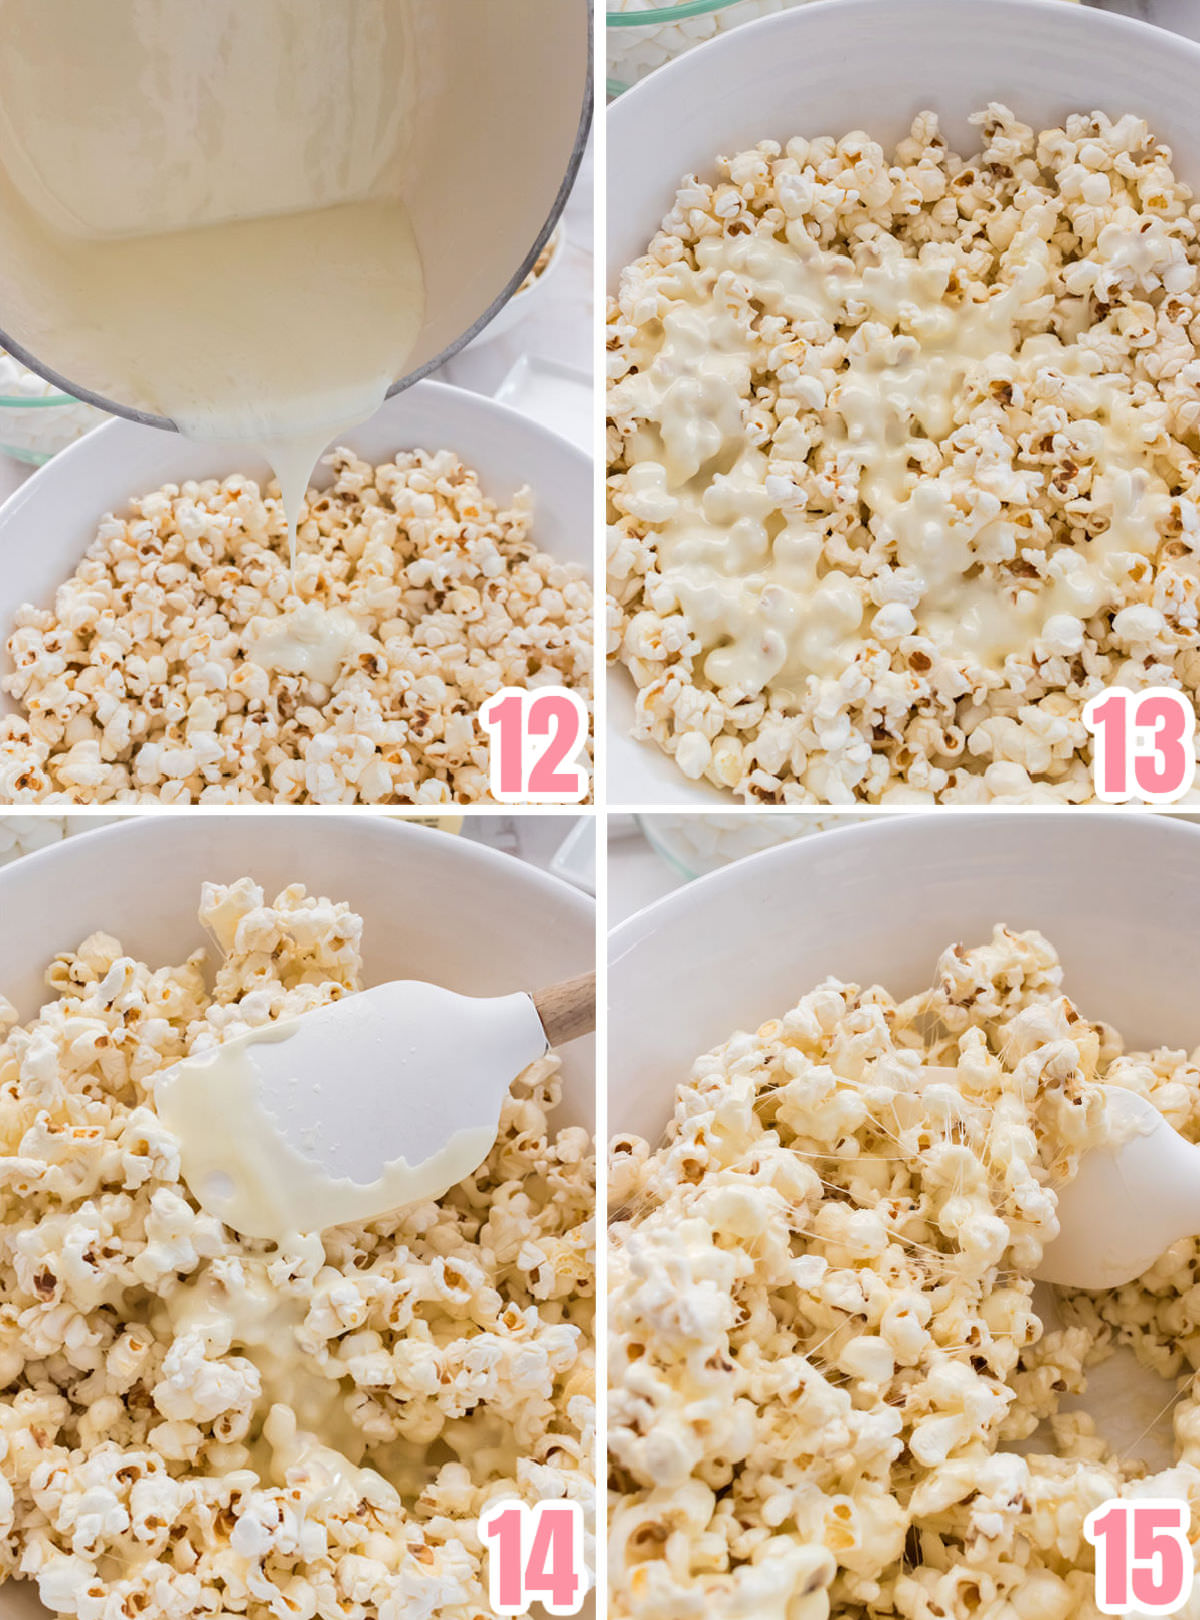 Collage image with step by step instructions on how to make the marshmallow popcorn.